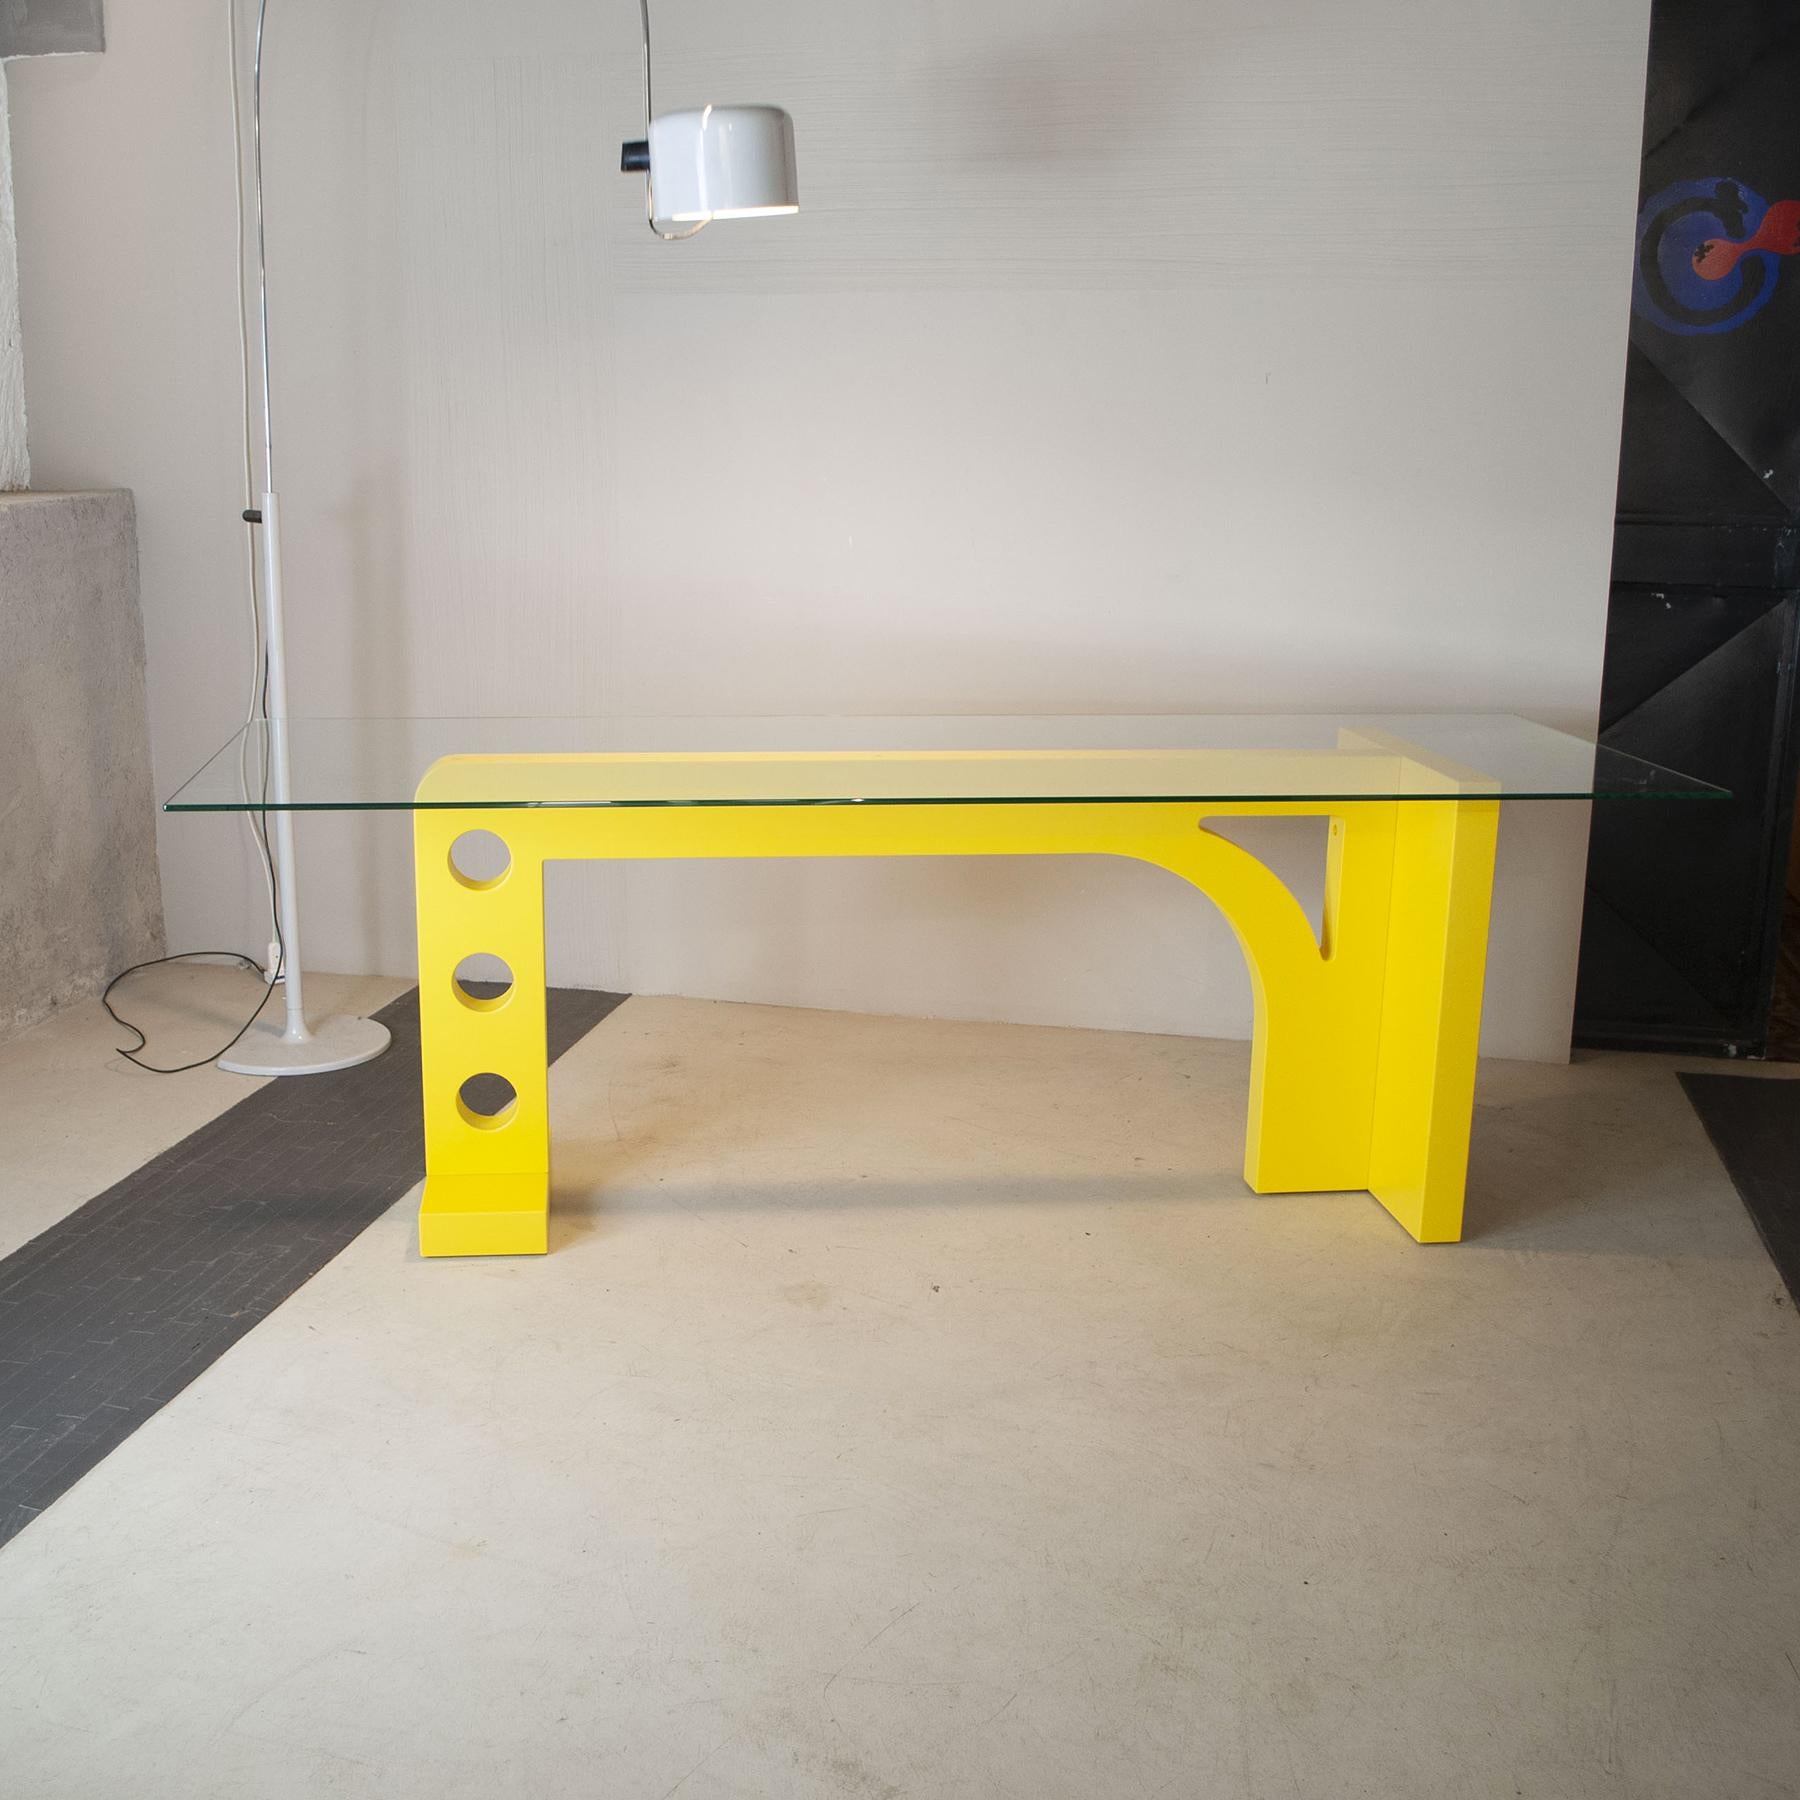 Meccano series table made by the Cellule Creative Studio design crew for a futuristic space, the table is inspired by some elements of the famous meccano game and the great Italian architect Cesare Leonardi .The vibrant color is a stylistic nod to